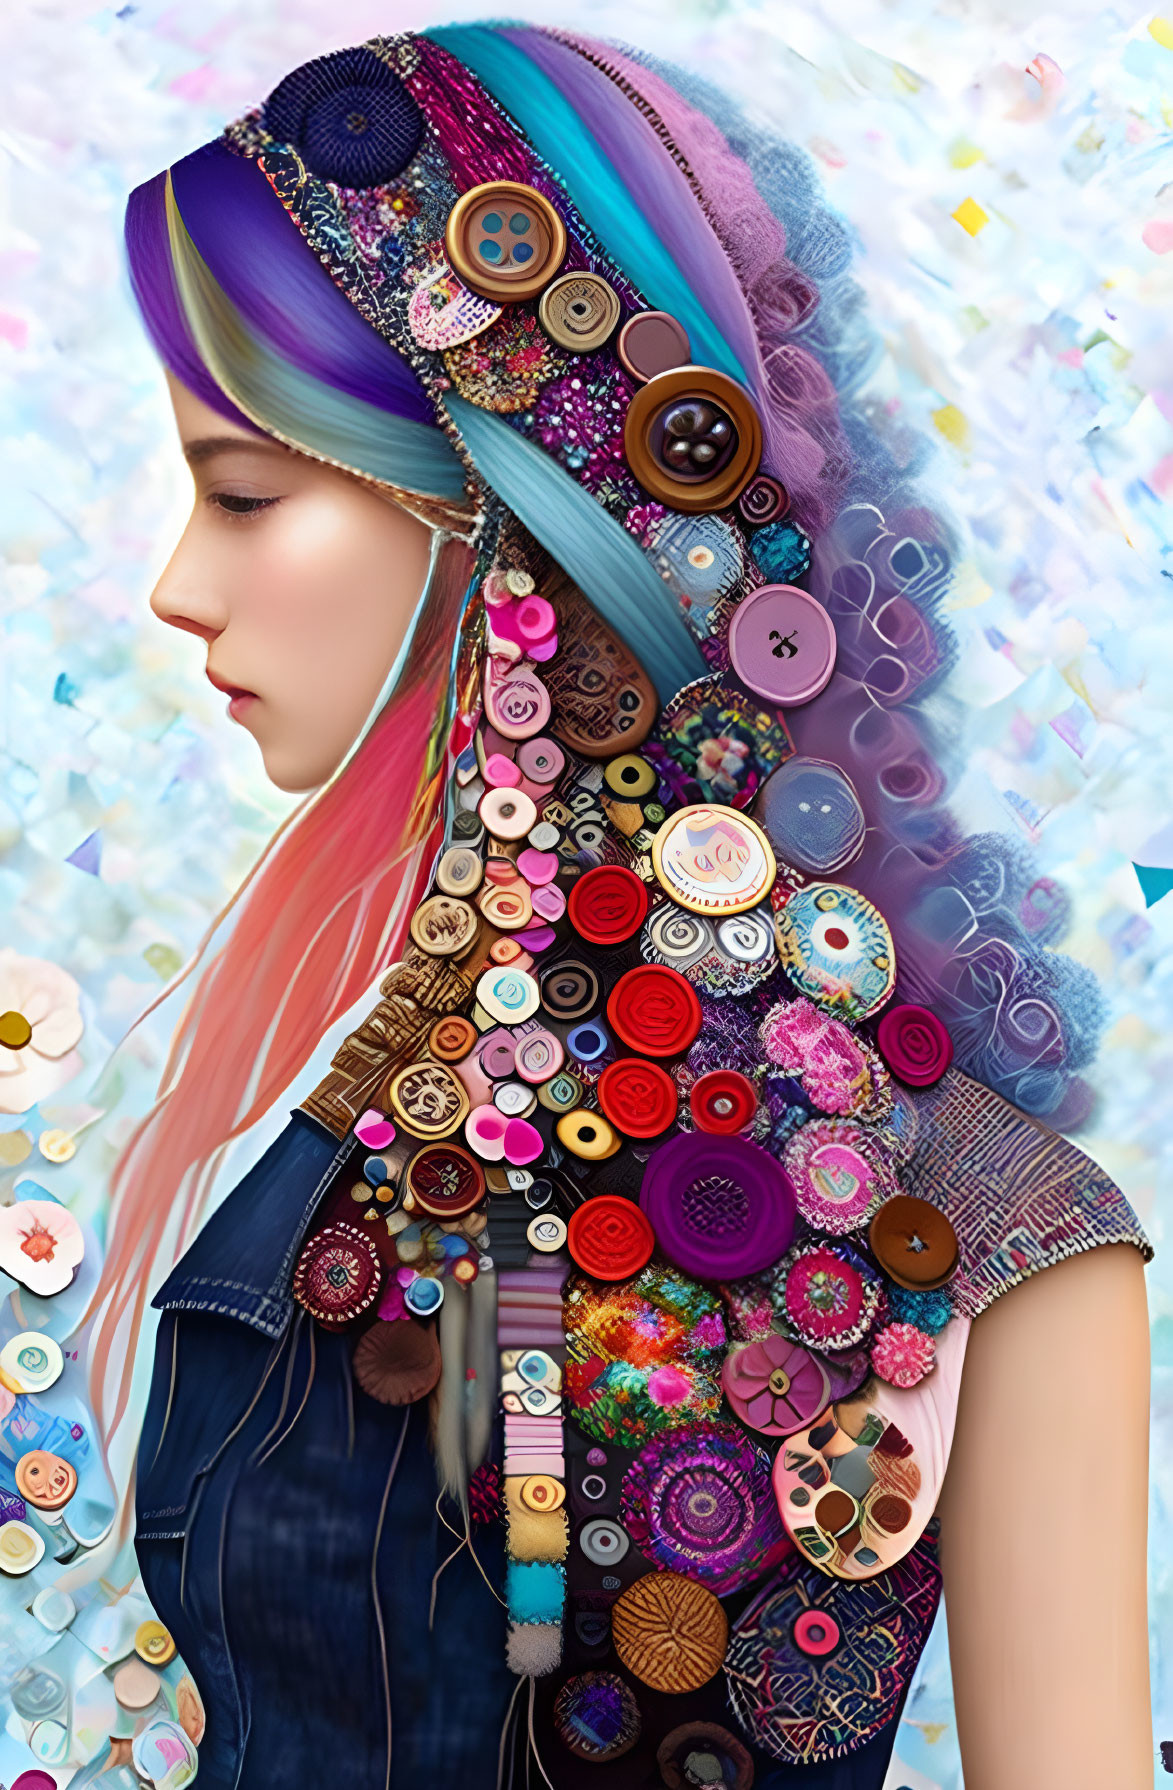 Colorful Hair Woman Profile with Buttons and Blossoms on Pastel Mosaic